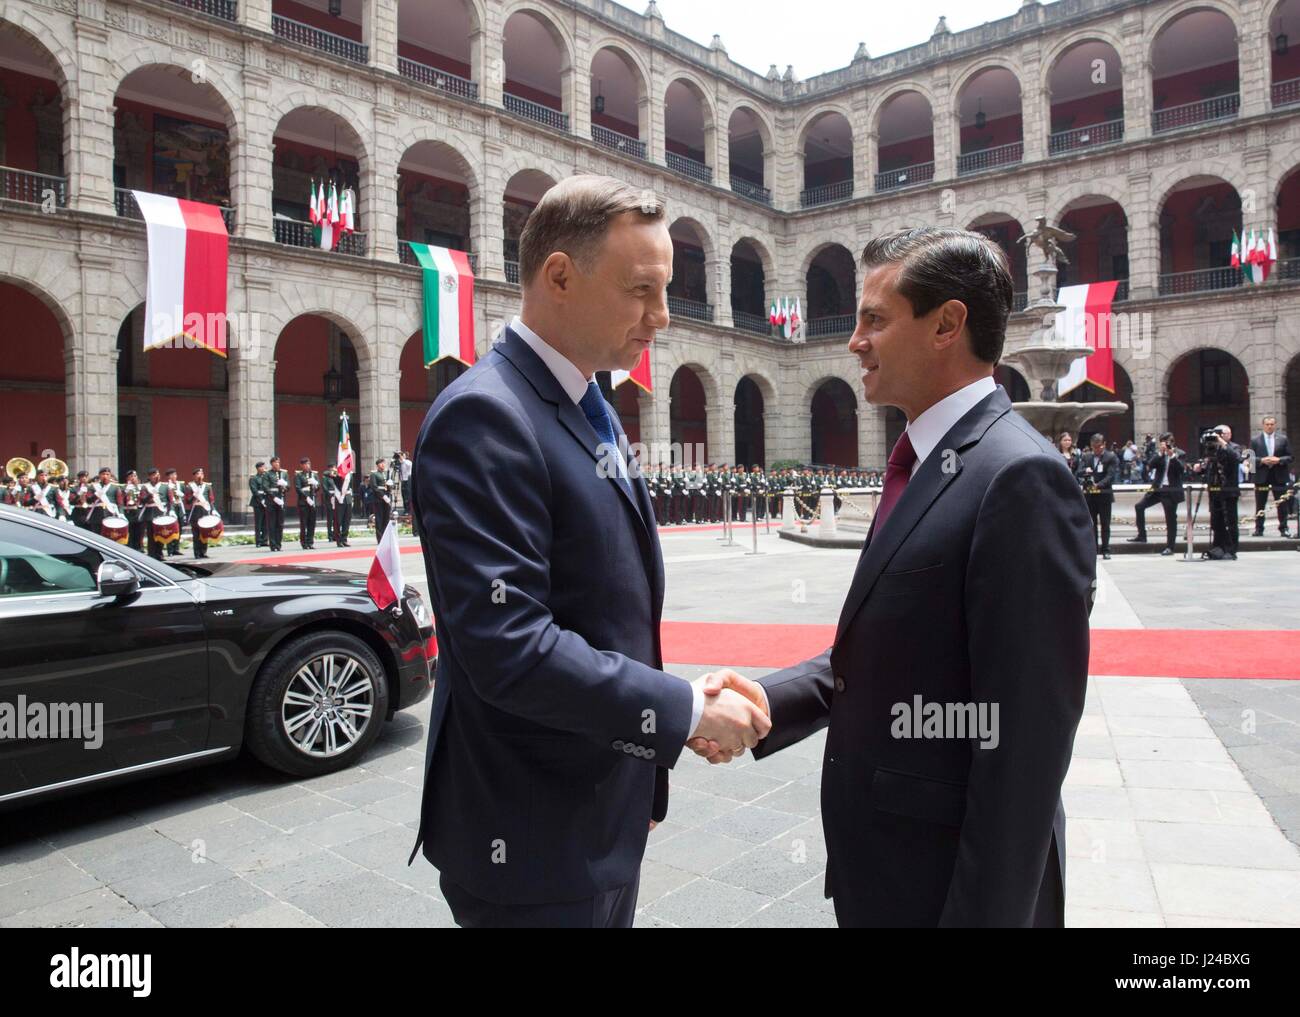 Mexico City, Mexico. 24th April, 2017. Mexican President Enrique Pena Nieto, right, welcomes Polish President Andrzej Duda during the formal arrival ceremony at the national palace April 24, 2017 in Mexico City, Mexico. Credit: Planetpix/Alamy Live News Stock Photo